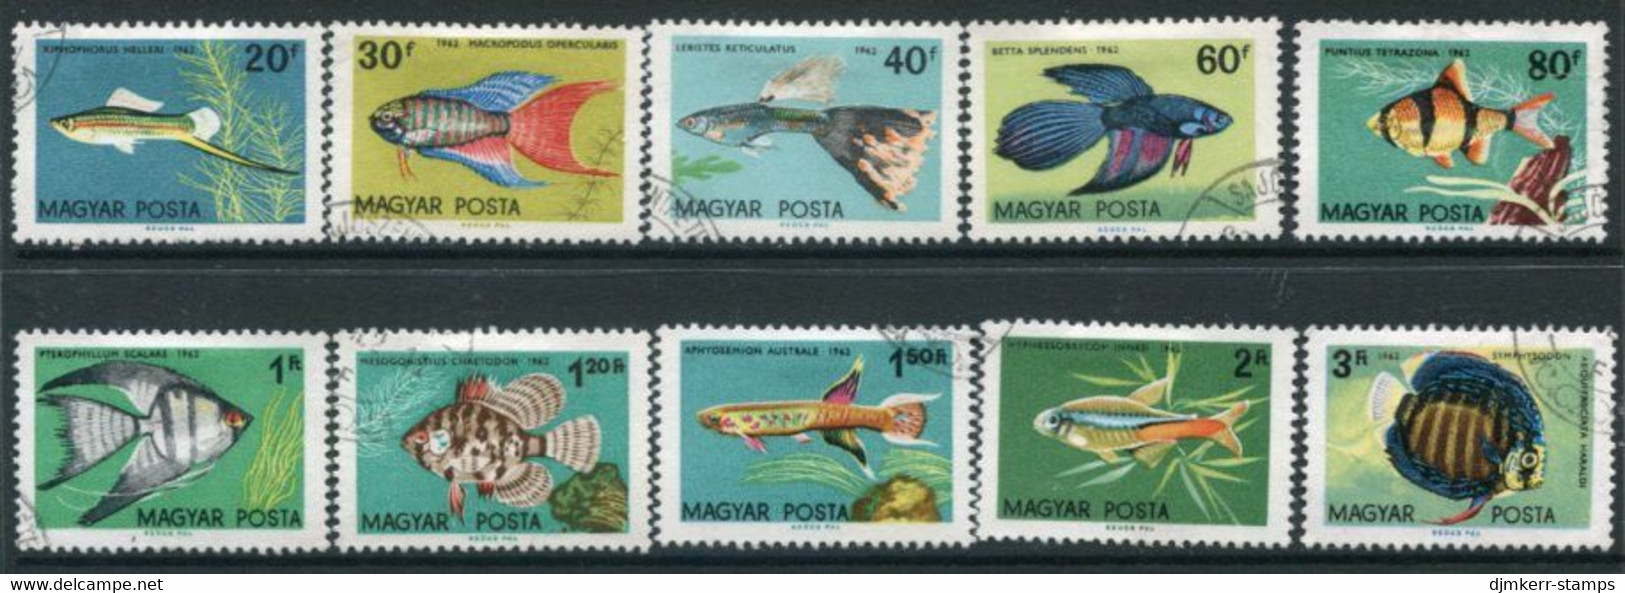 HUNGARY 1962 Ornamental Fish Used.  Michel 1820-29 - Used Stamps